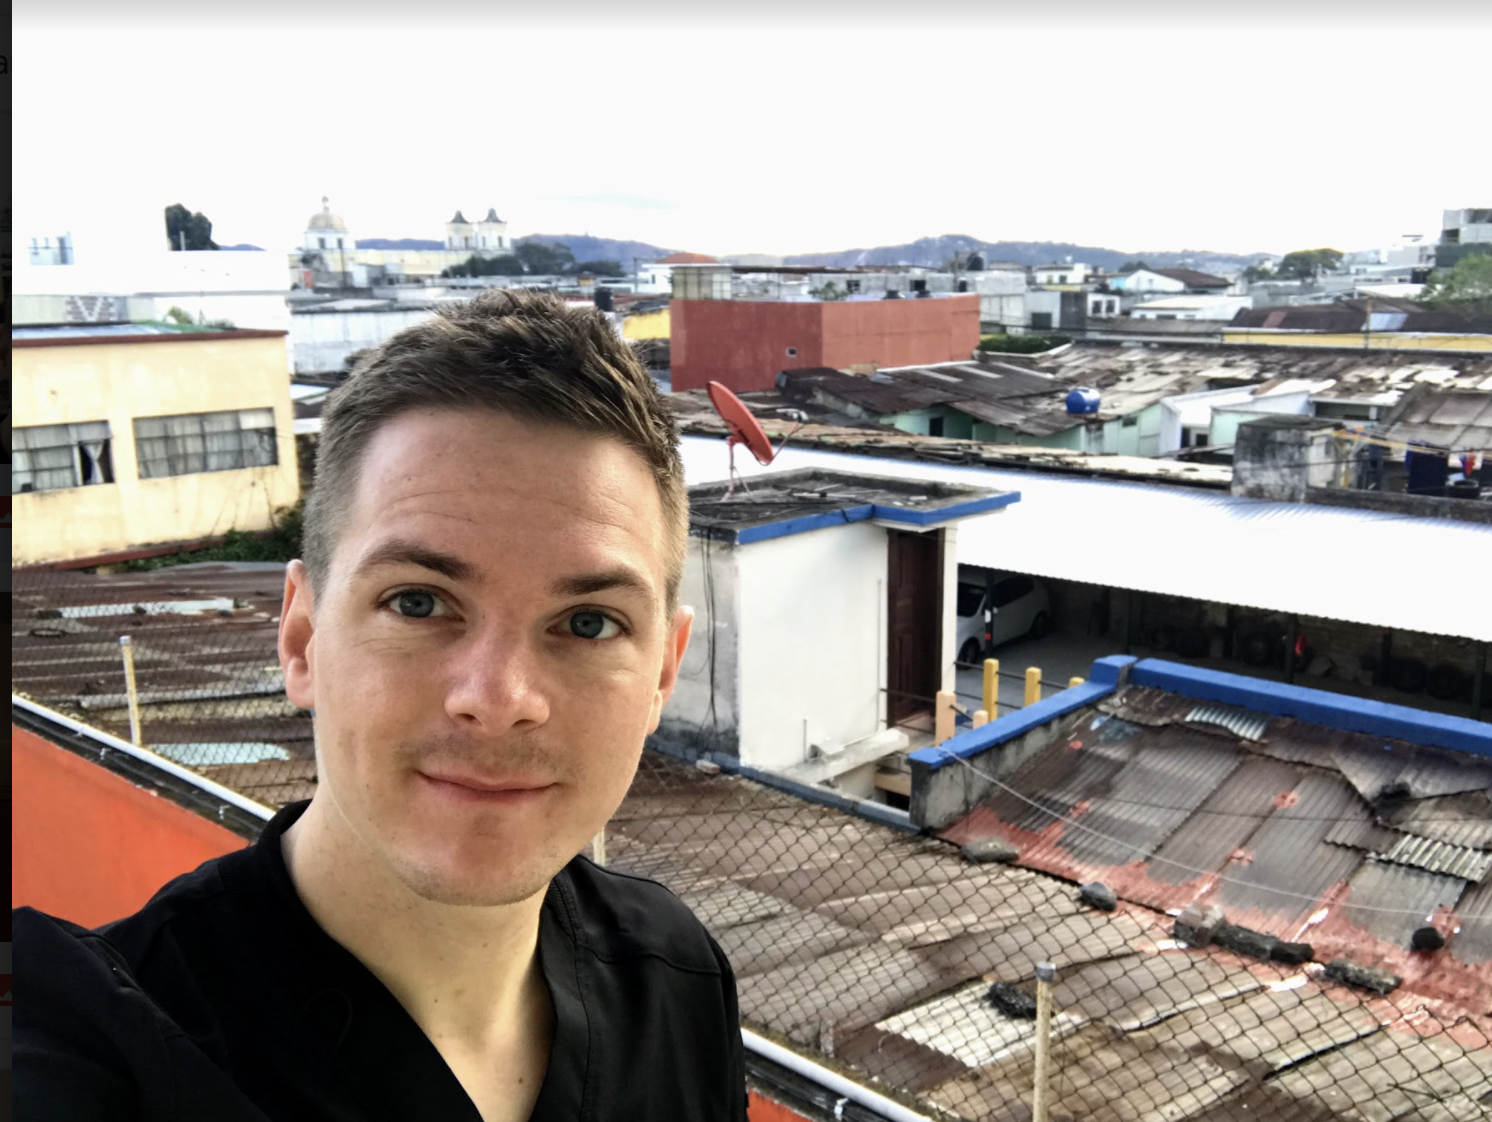 Dr. Morris on the rooftops in India